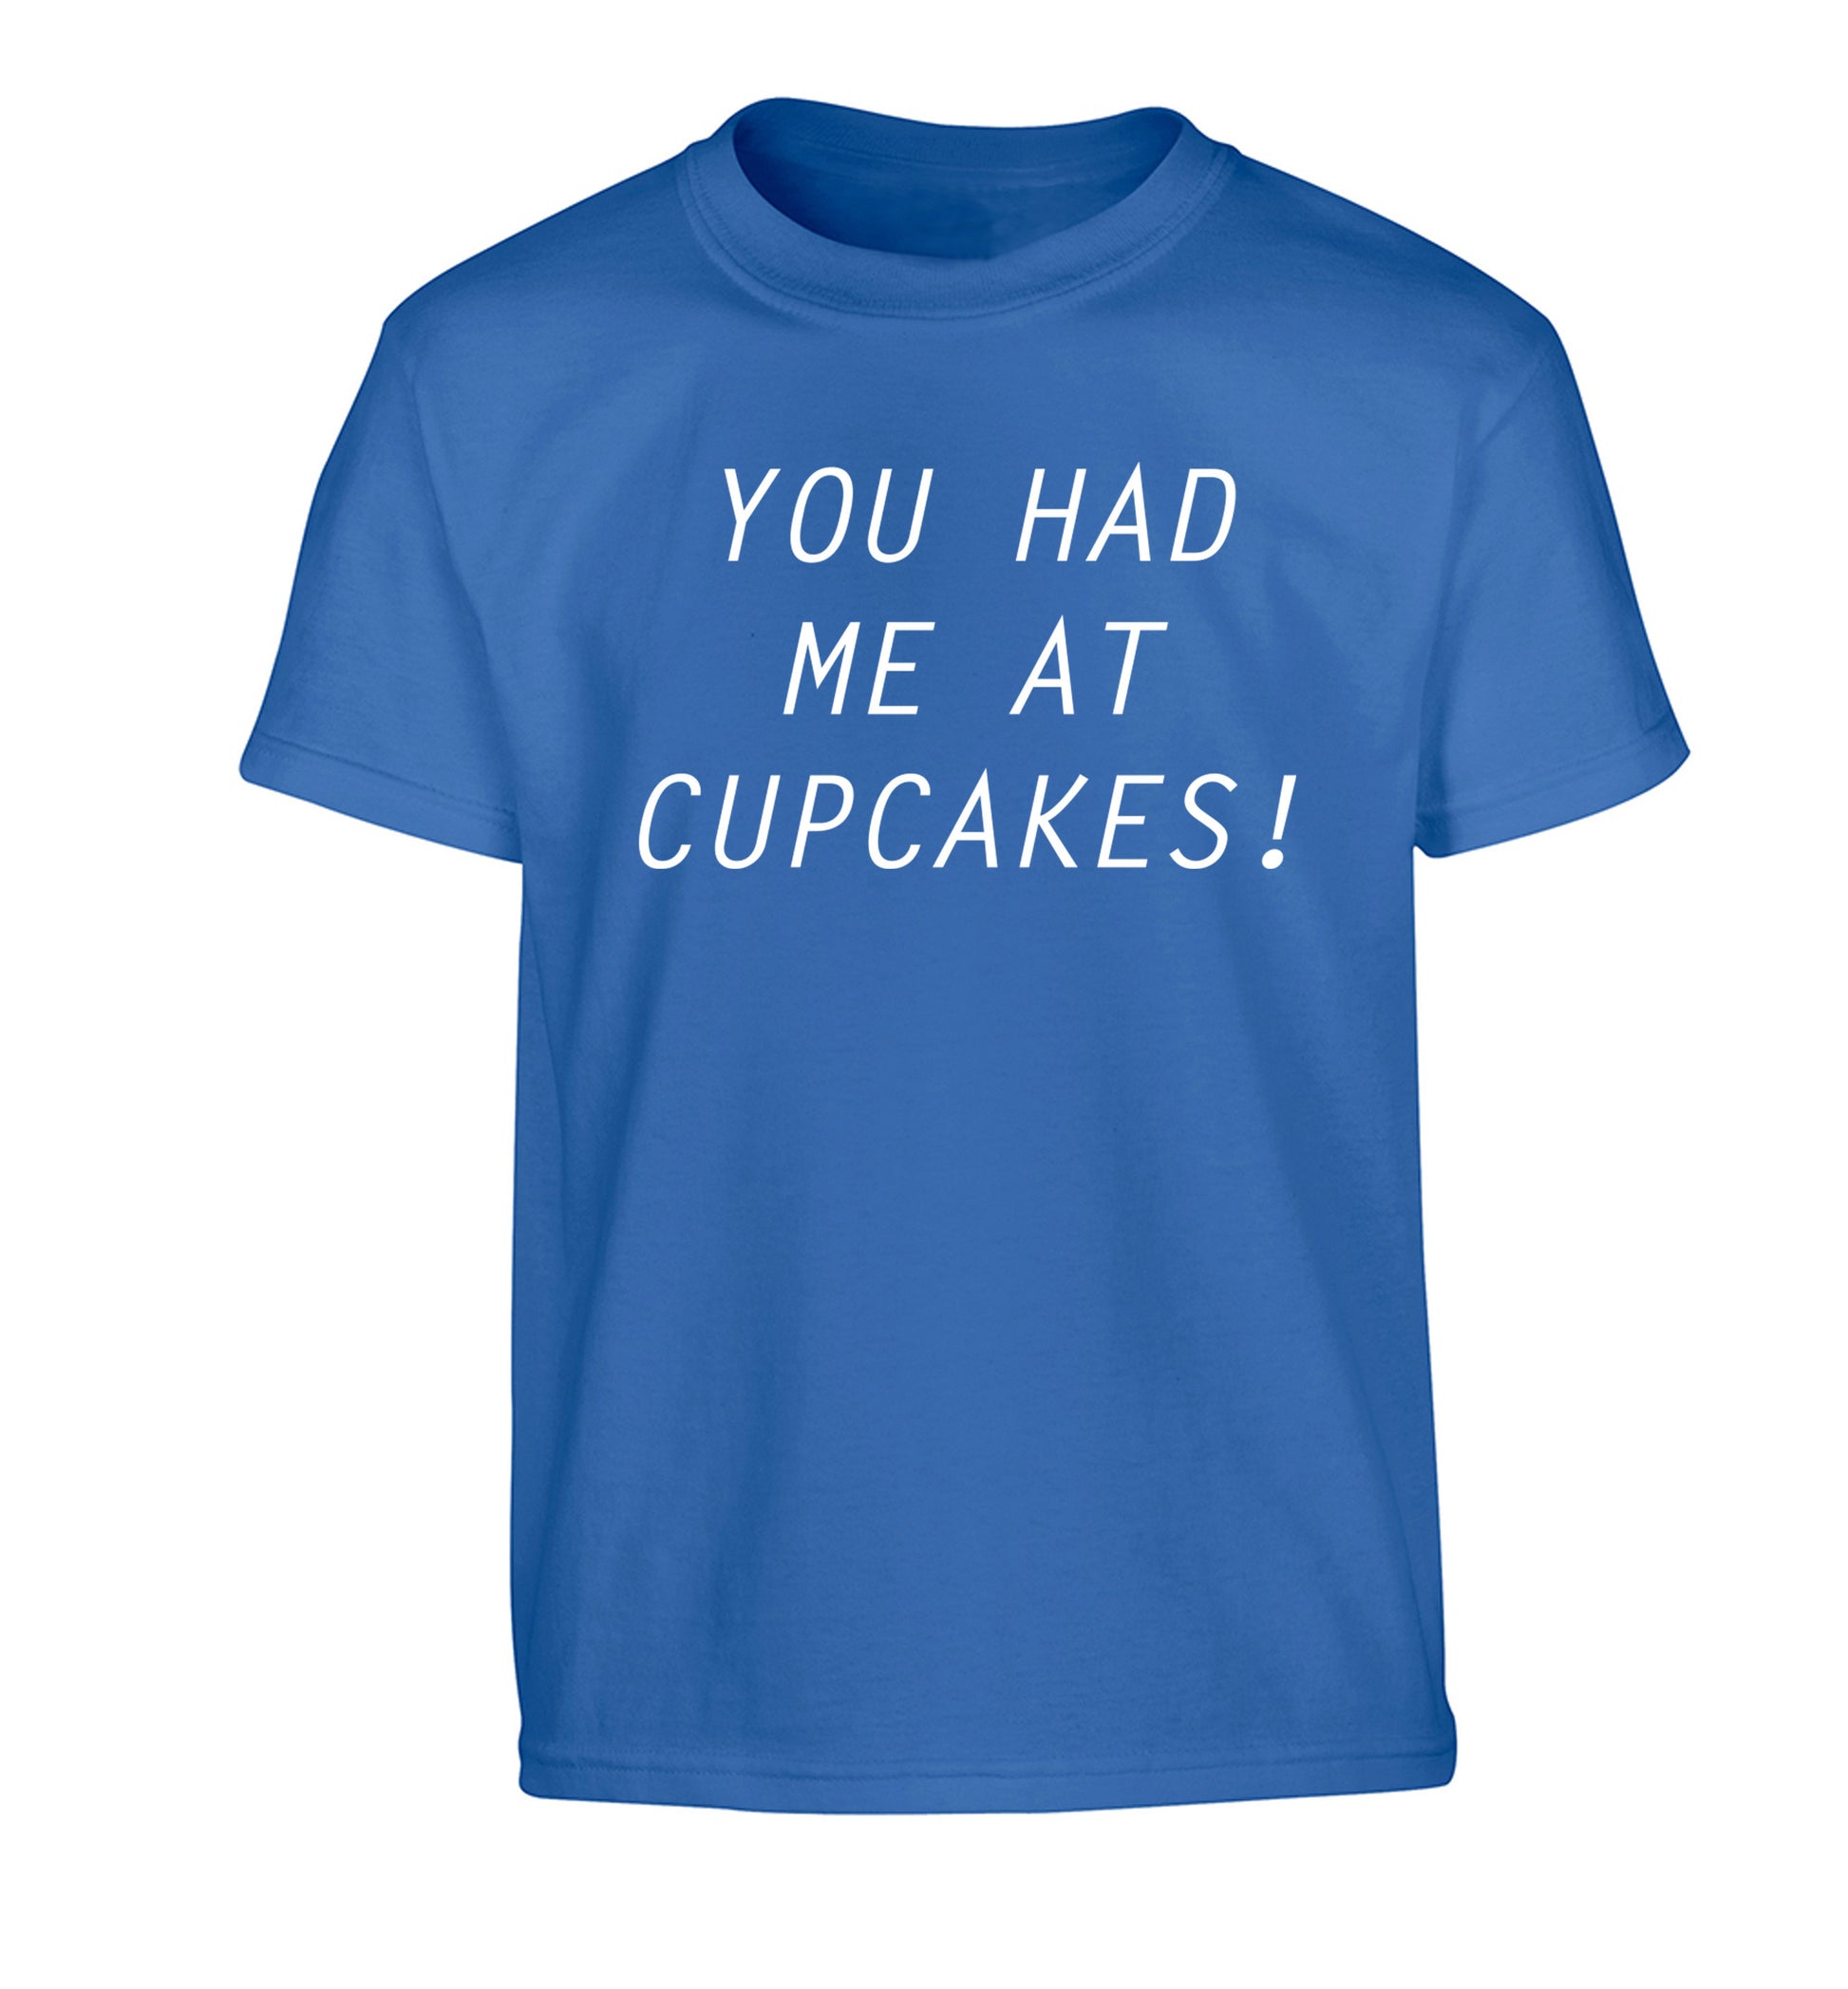 You had me at cupcakes Children's blue Tshirt 12-14 Years